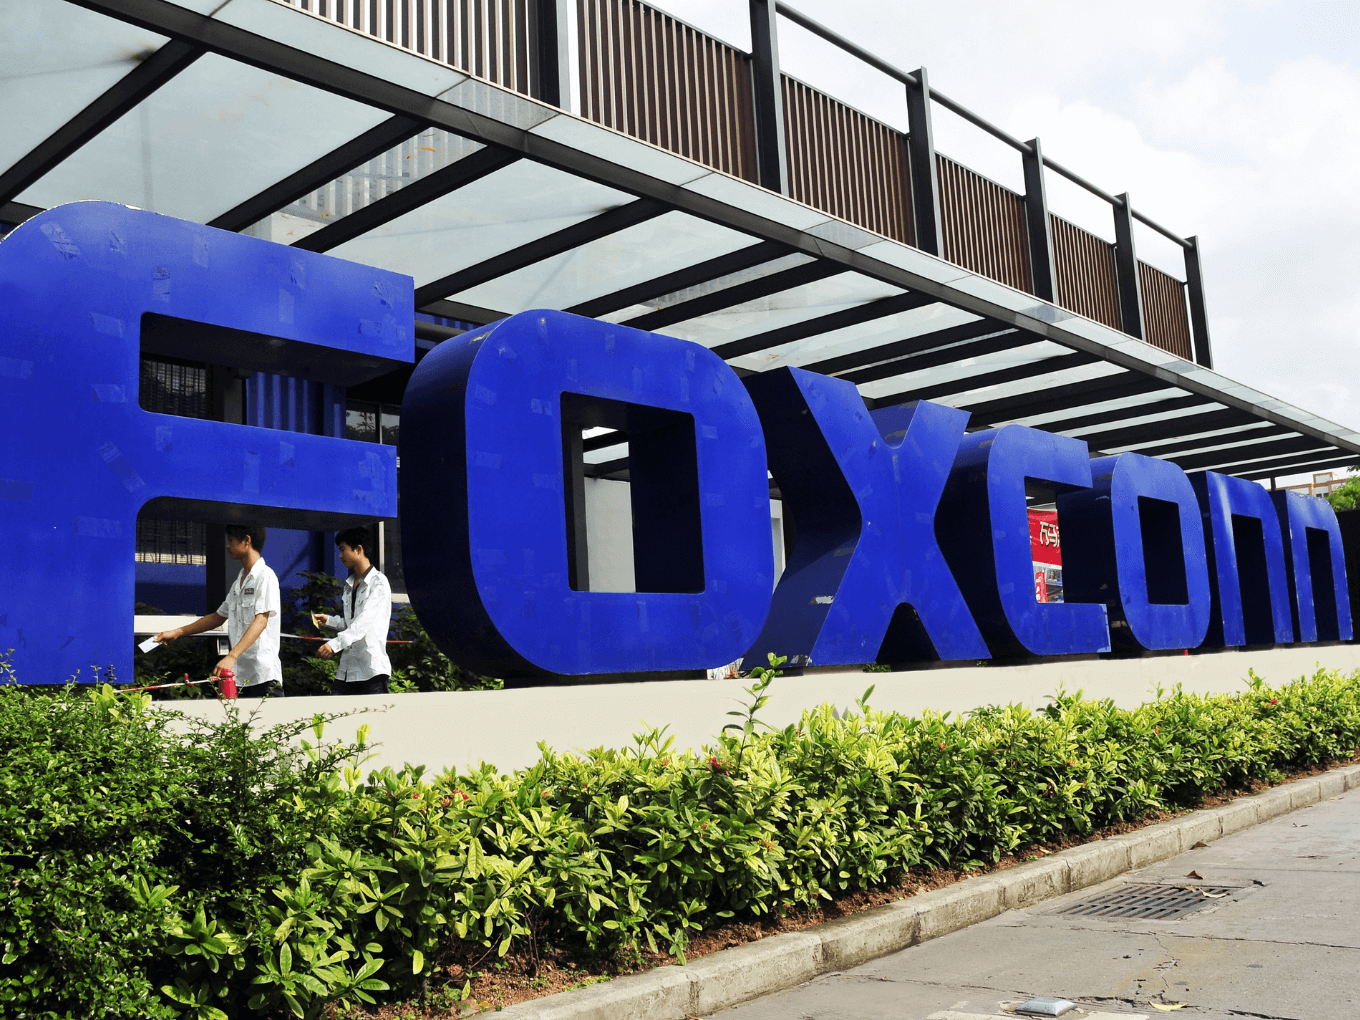 iPhone Maker Foxconn Boosts India Unit With $500 Mn Infusion - Inc42 (Picture 1)